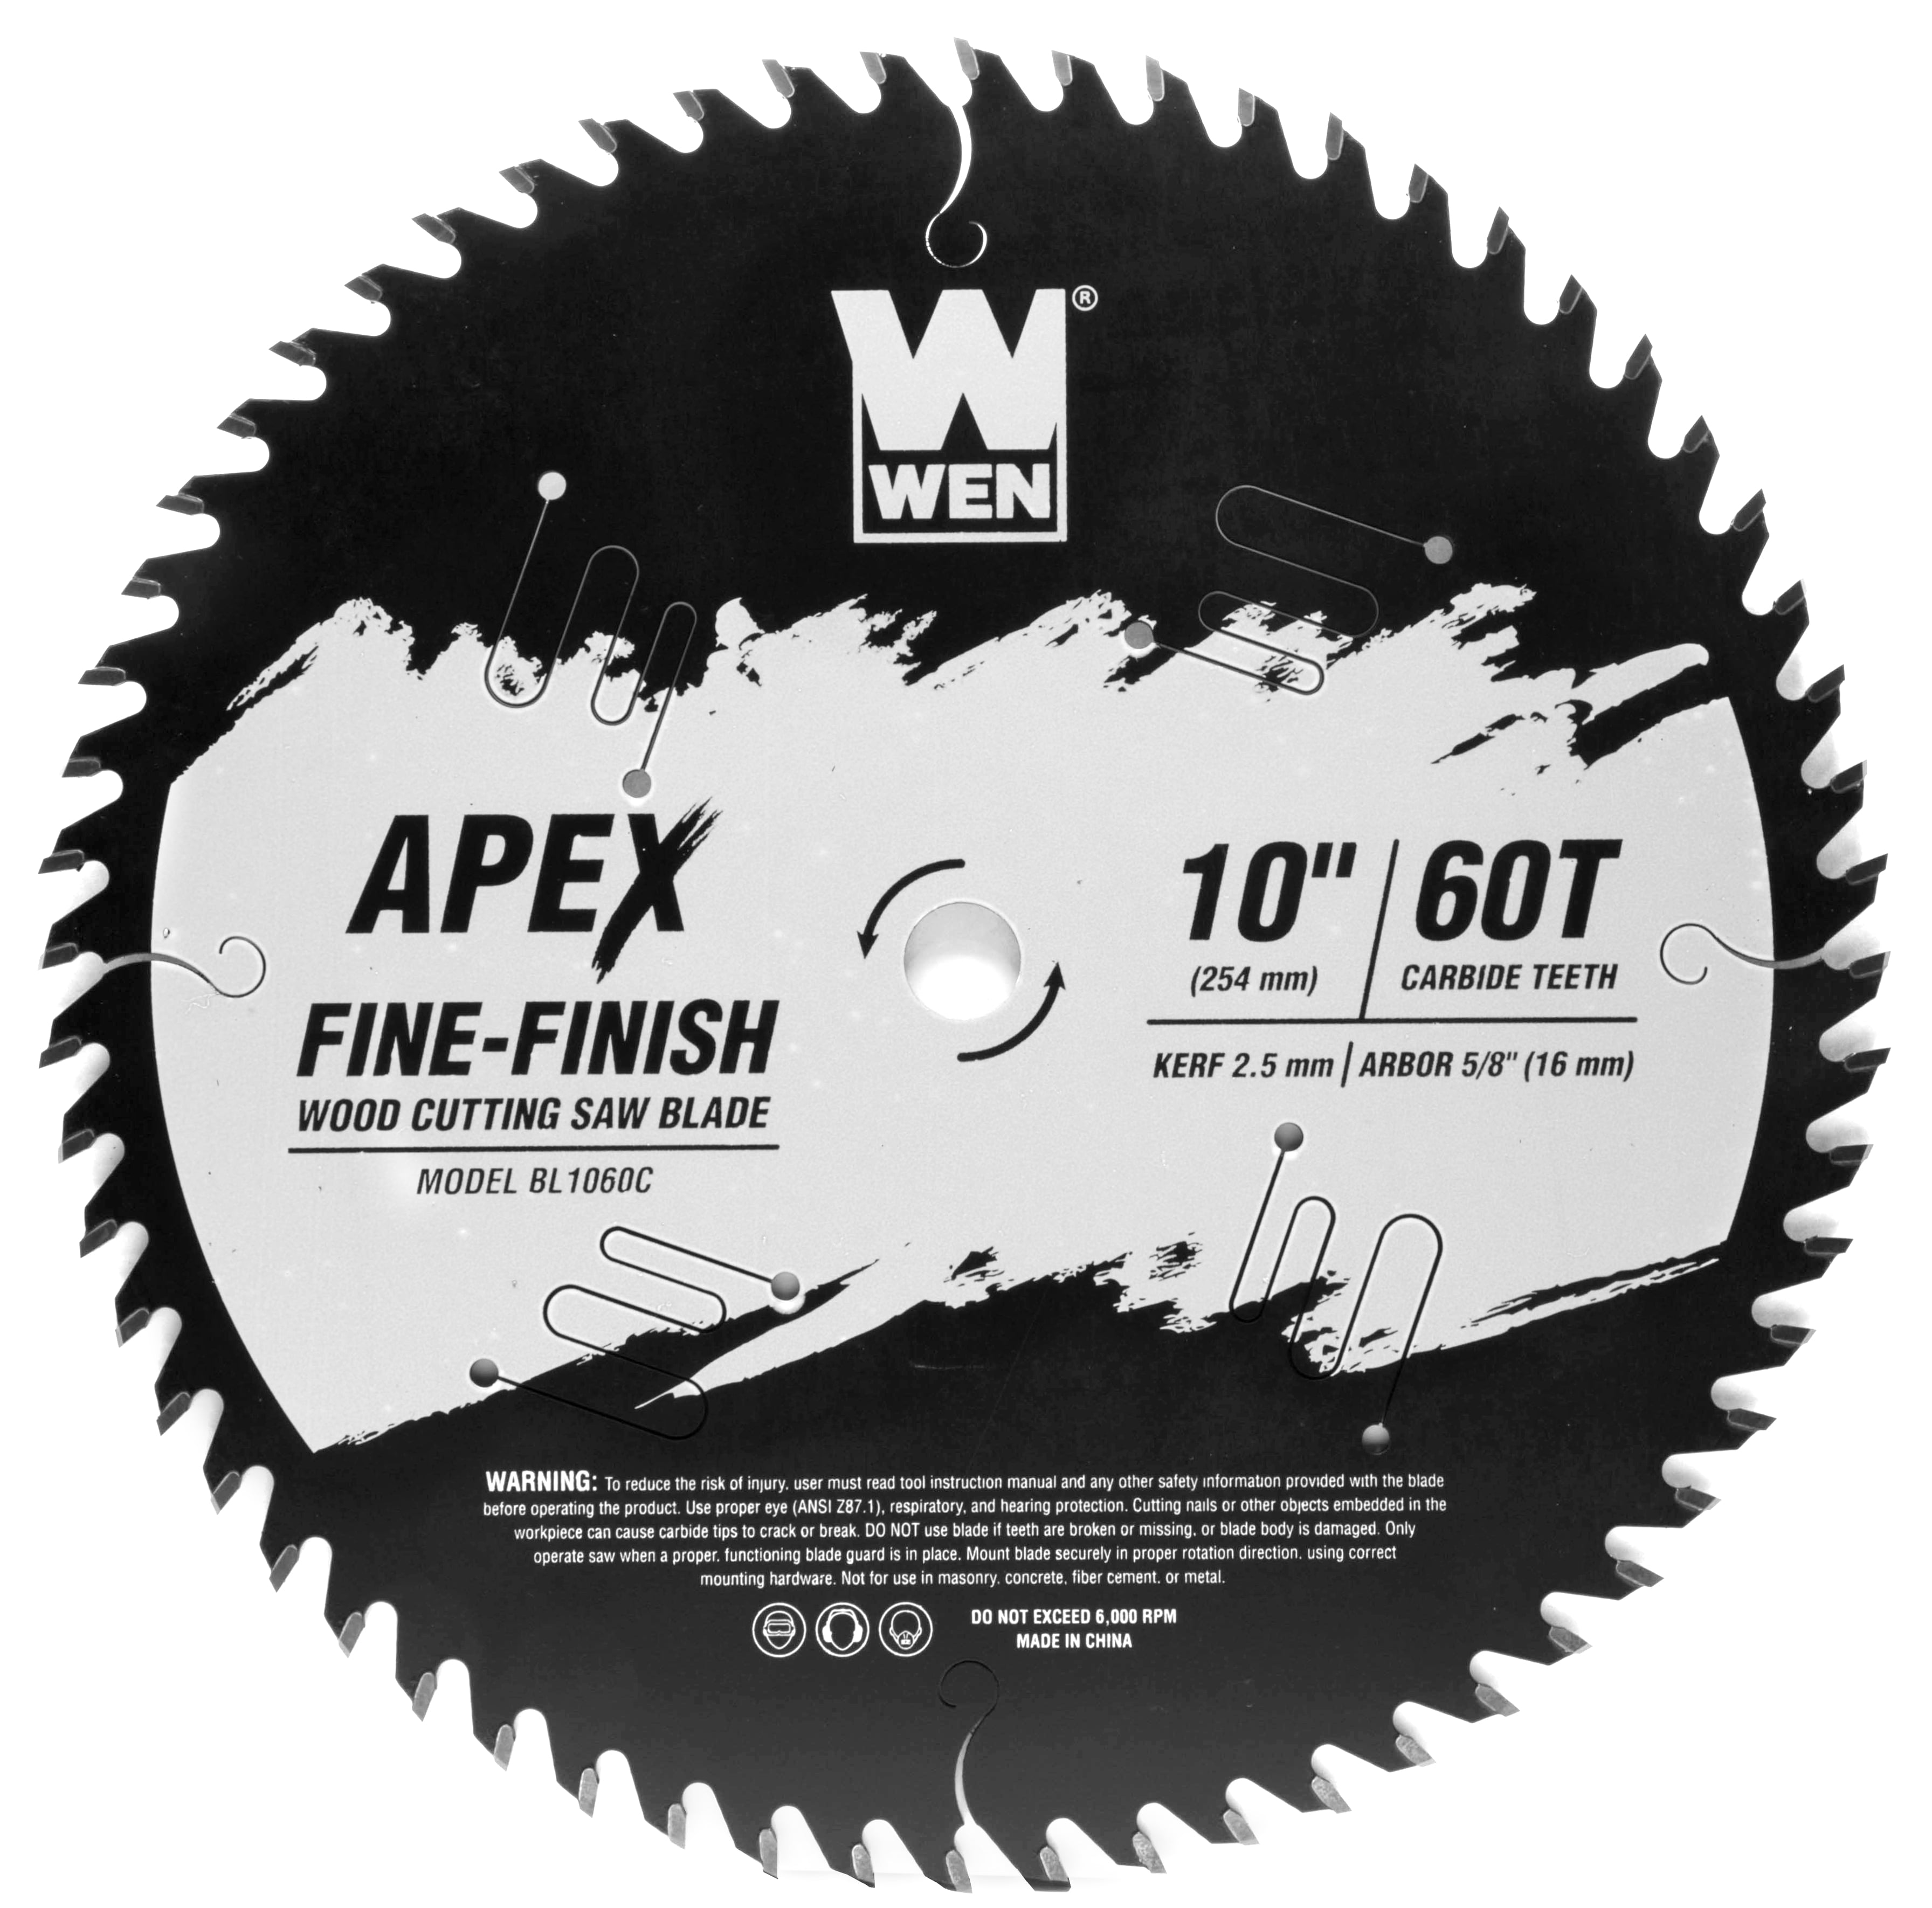 8 Inch Carbide Tipped Circular Saw Blade For Wood Cutting 80 Tooth Woodworking 